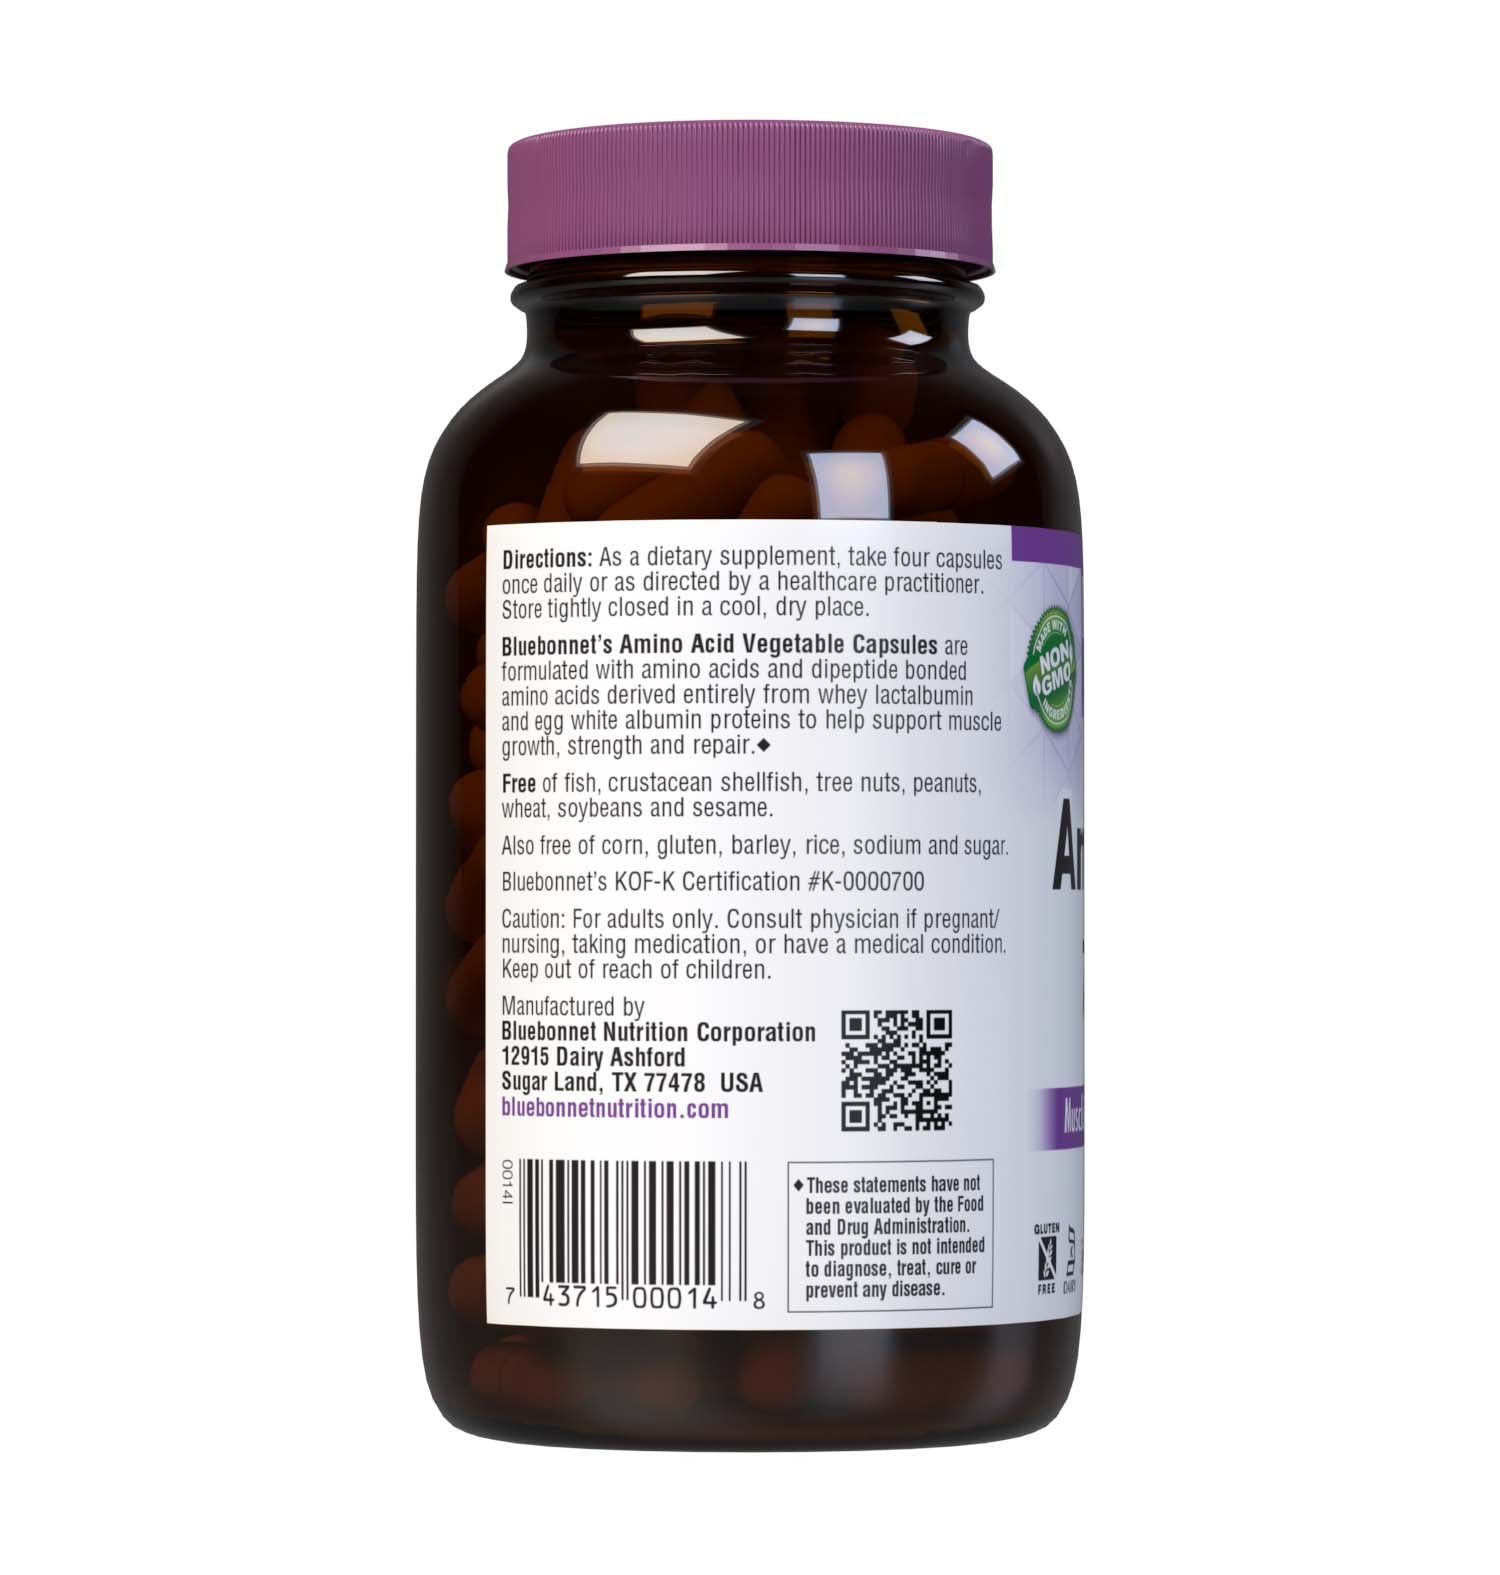 Bluebonnet's Amino Acid 180 Vegetable Capsules contain amino acidsand dipeptide bonded amino acids derived entirely from whey lactalbumin and egg white albumin proteins for muscle growth, strength and repair. description panel. #size_180 count